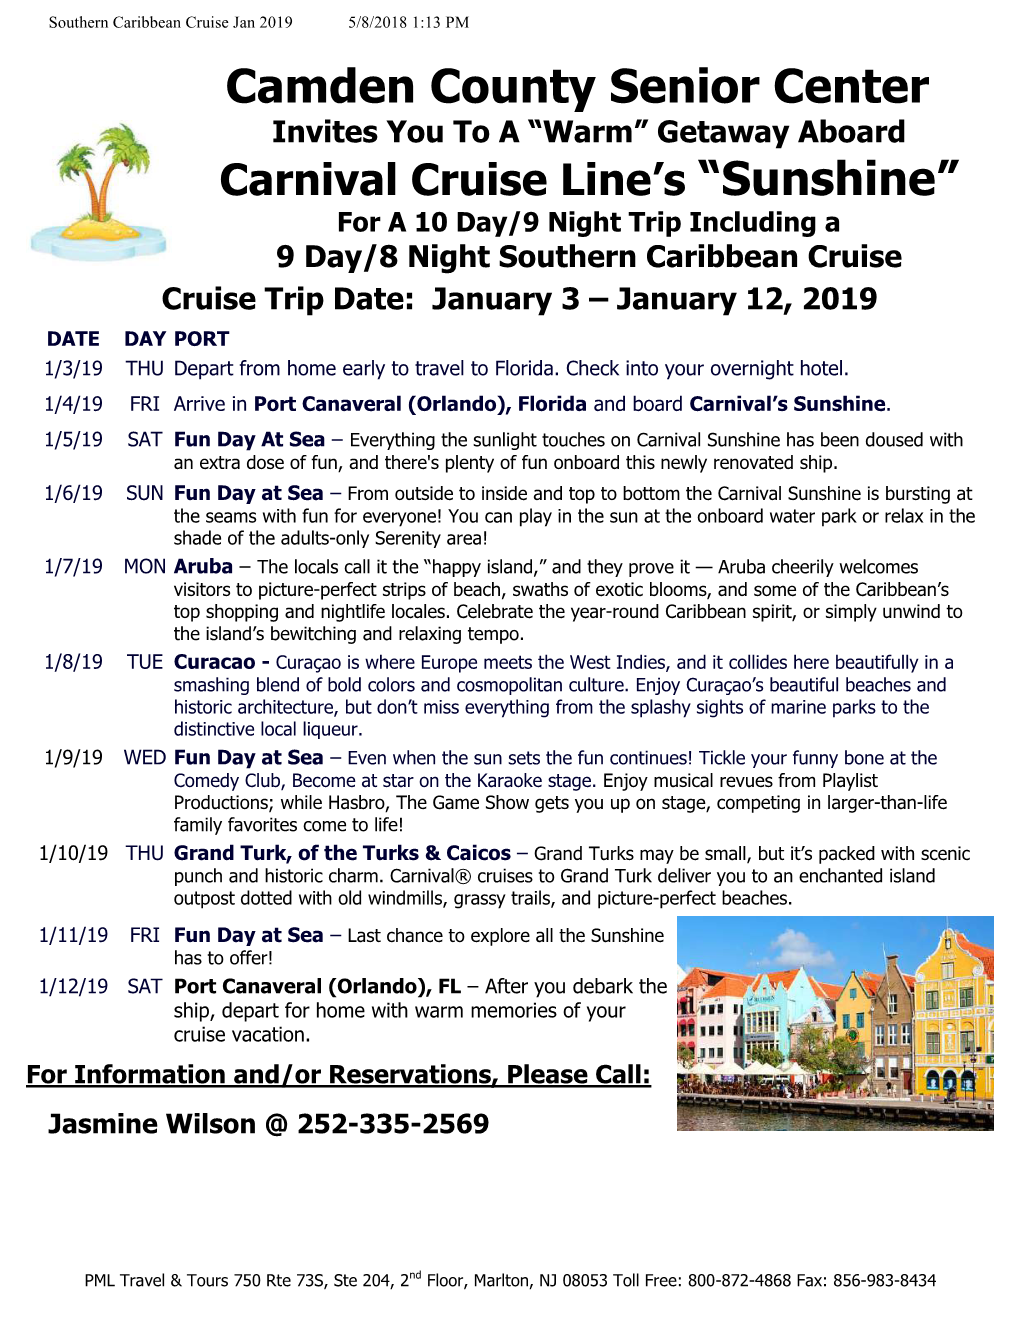 Southern Caribbean Cruise 2019